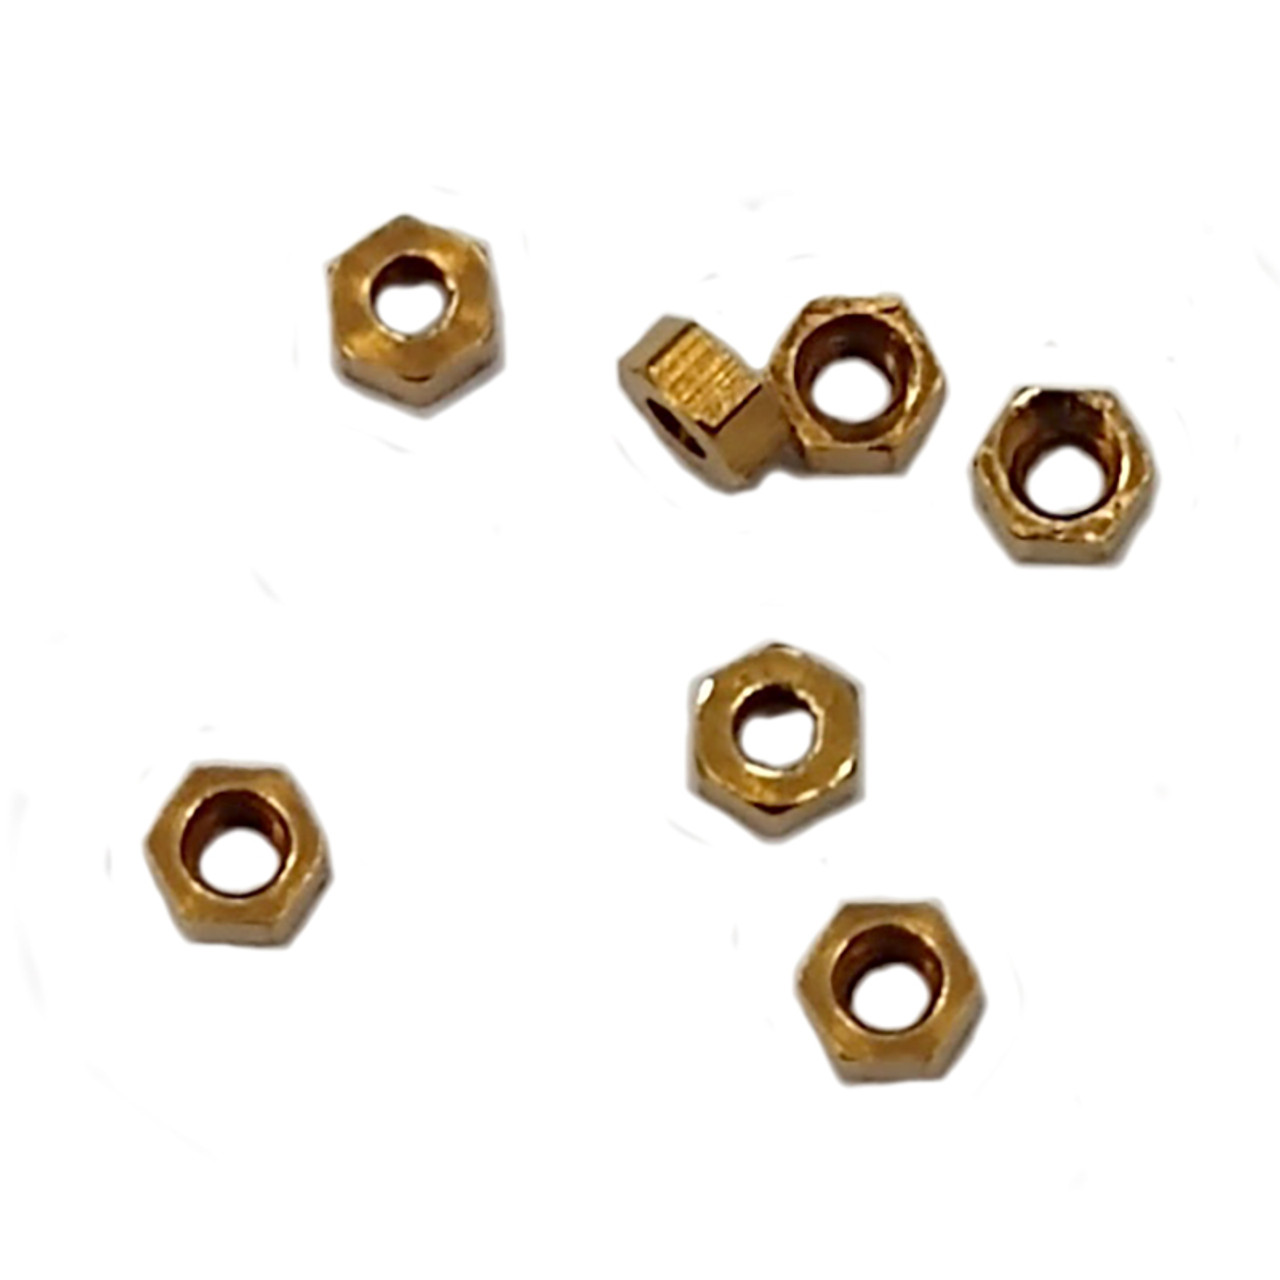 Picture is of actual product aren't looking great!
Machined Hex Nut
Thread 000-120 class 2 thread 
ACF 5/64" (across the flats) 2.00mm 
Thickness 0.39" / 1.0mm
Material: Brass
Part Color Finish natural "Brass color" 
Price is for 100 count package with bulk pricing available.